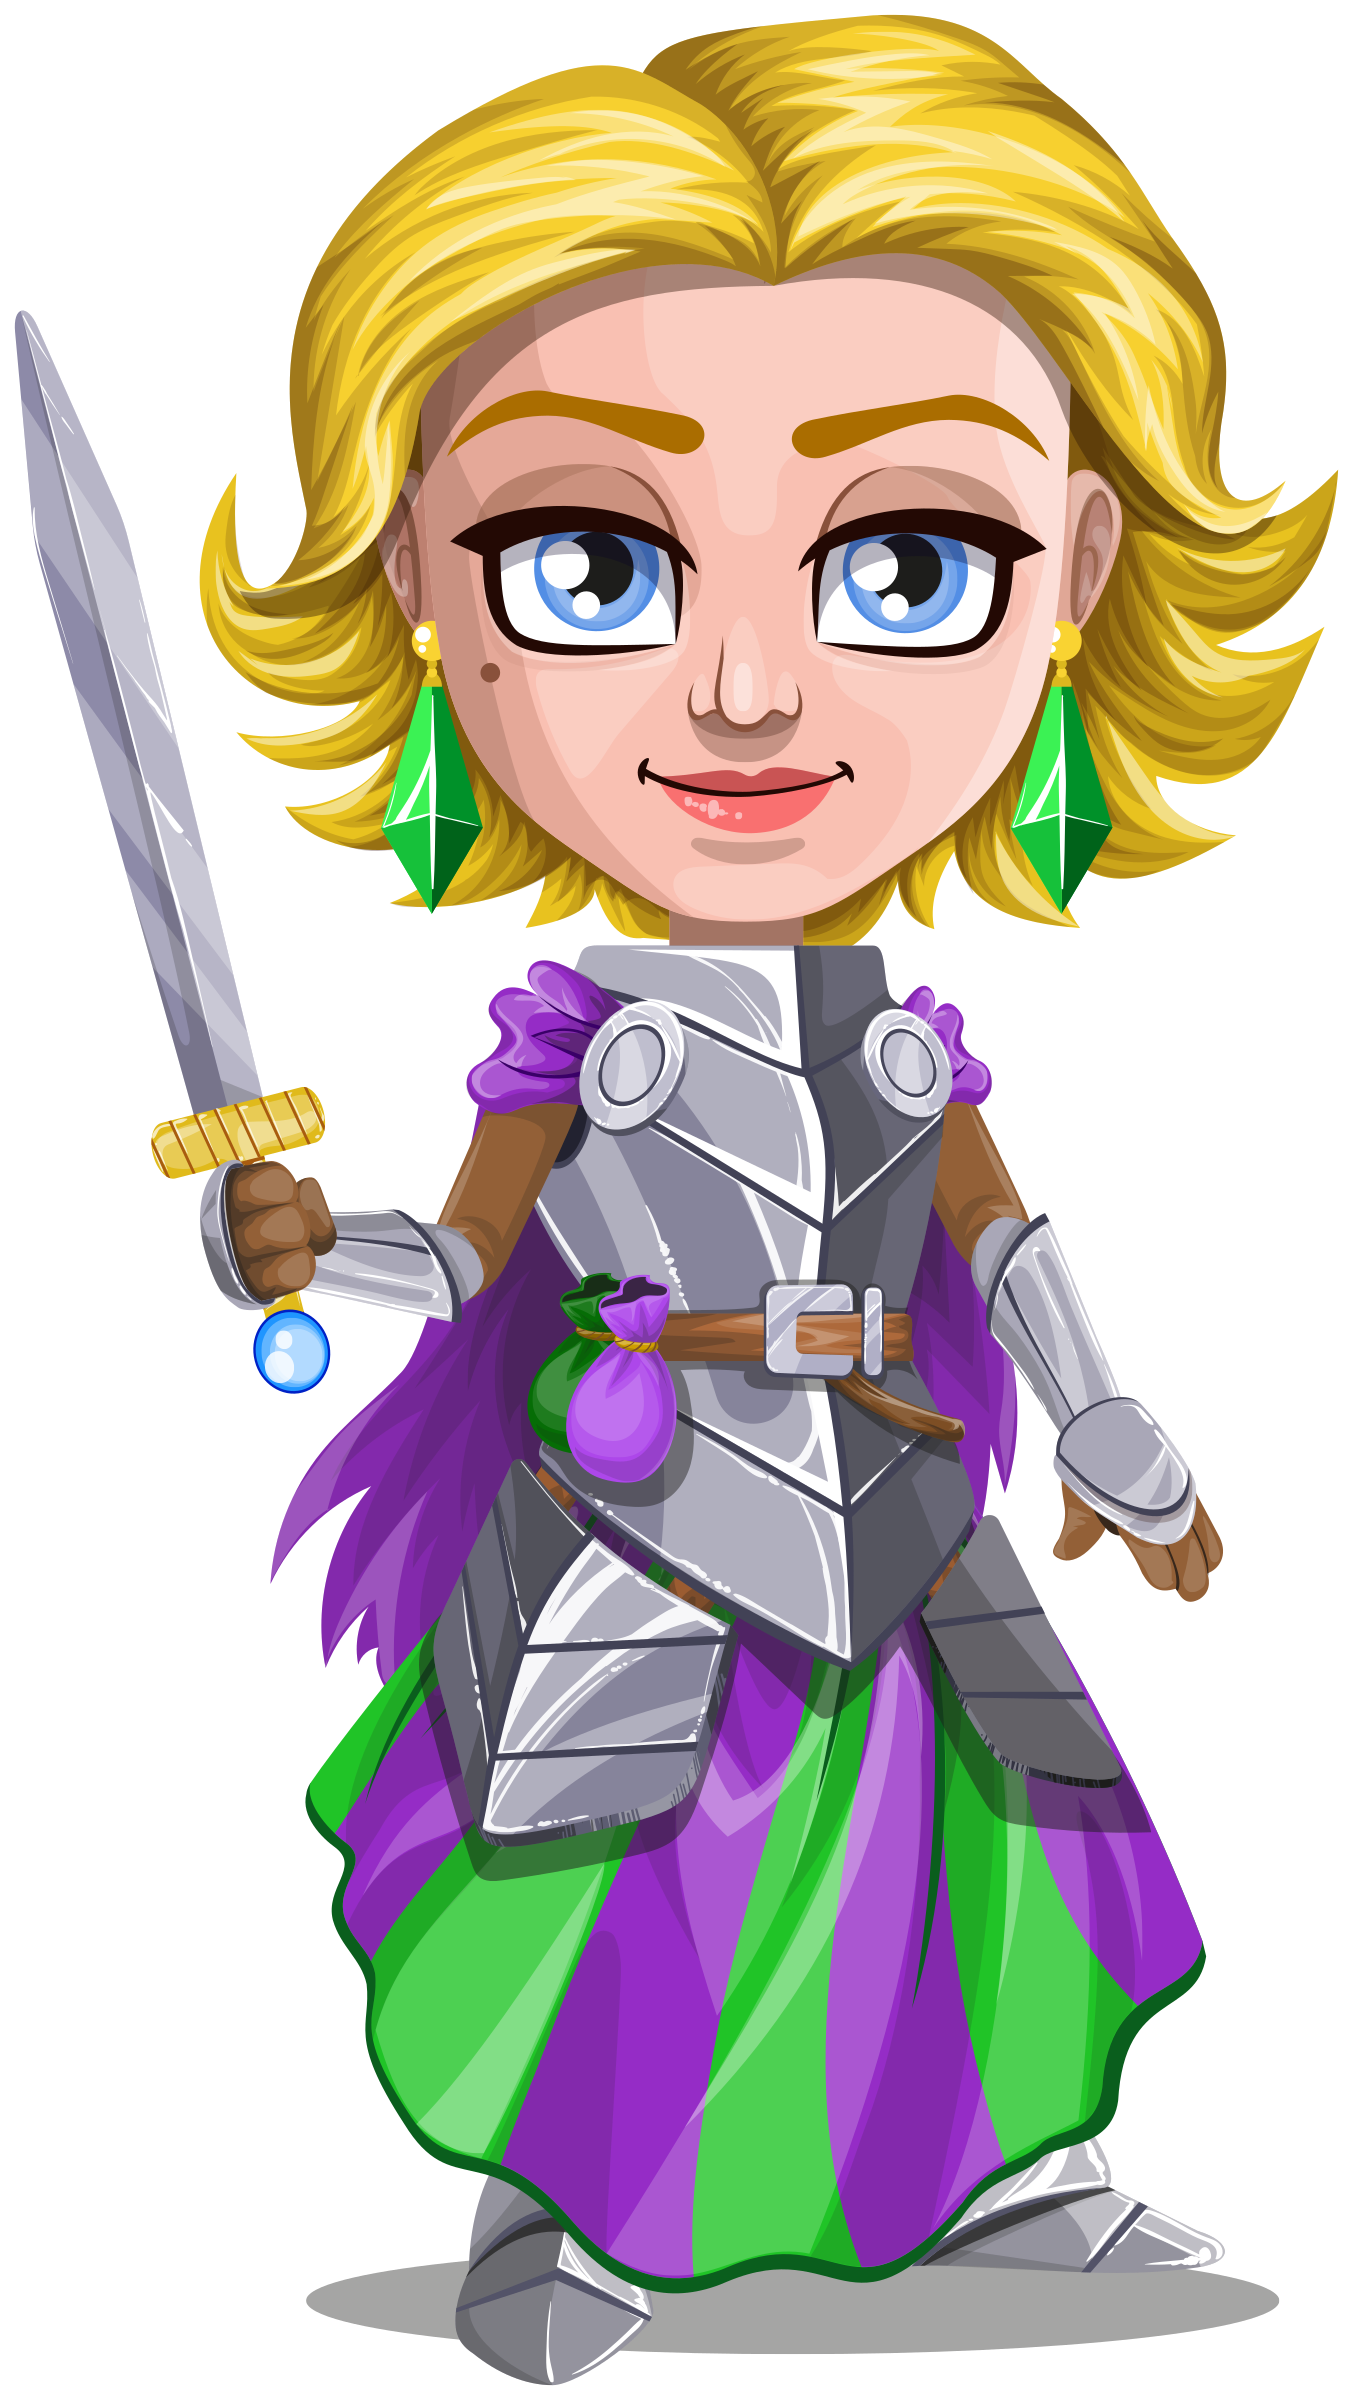 Woman knight warrior in. France clipart elegant person